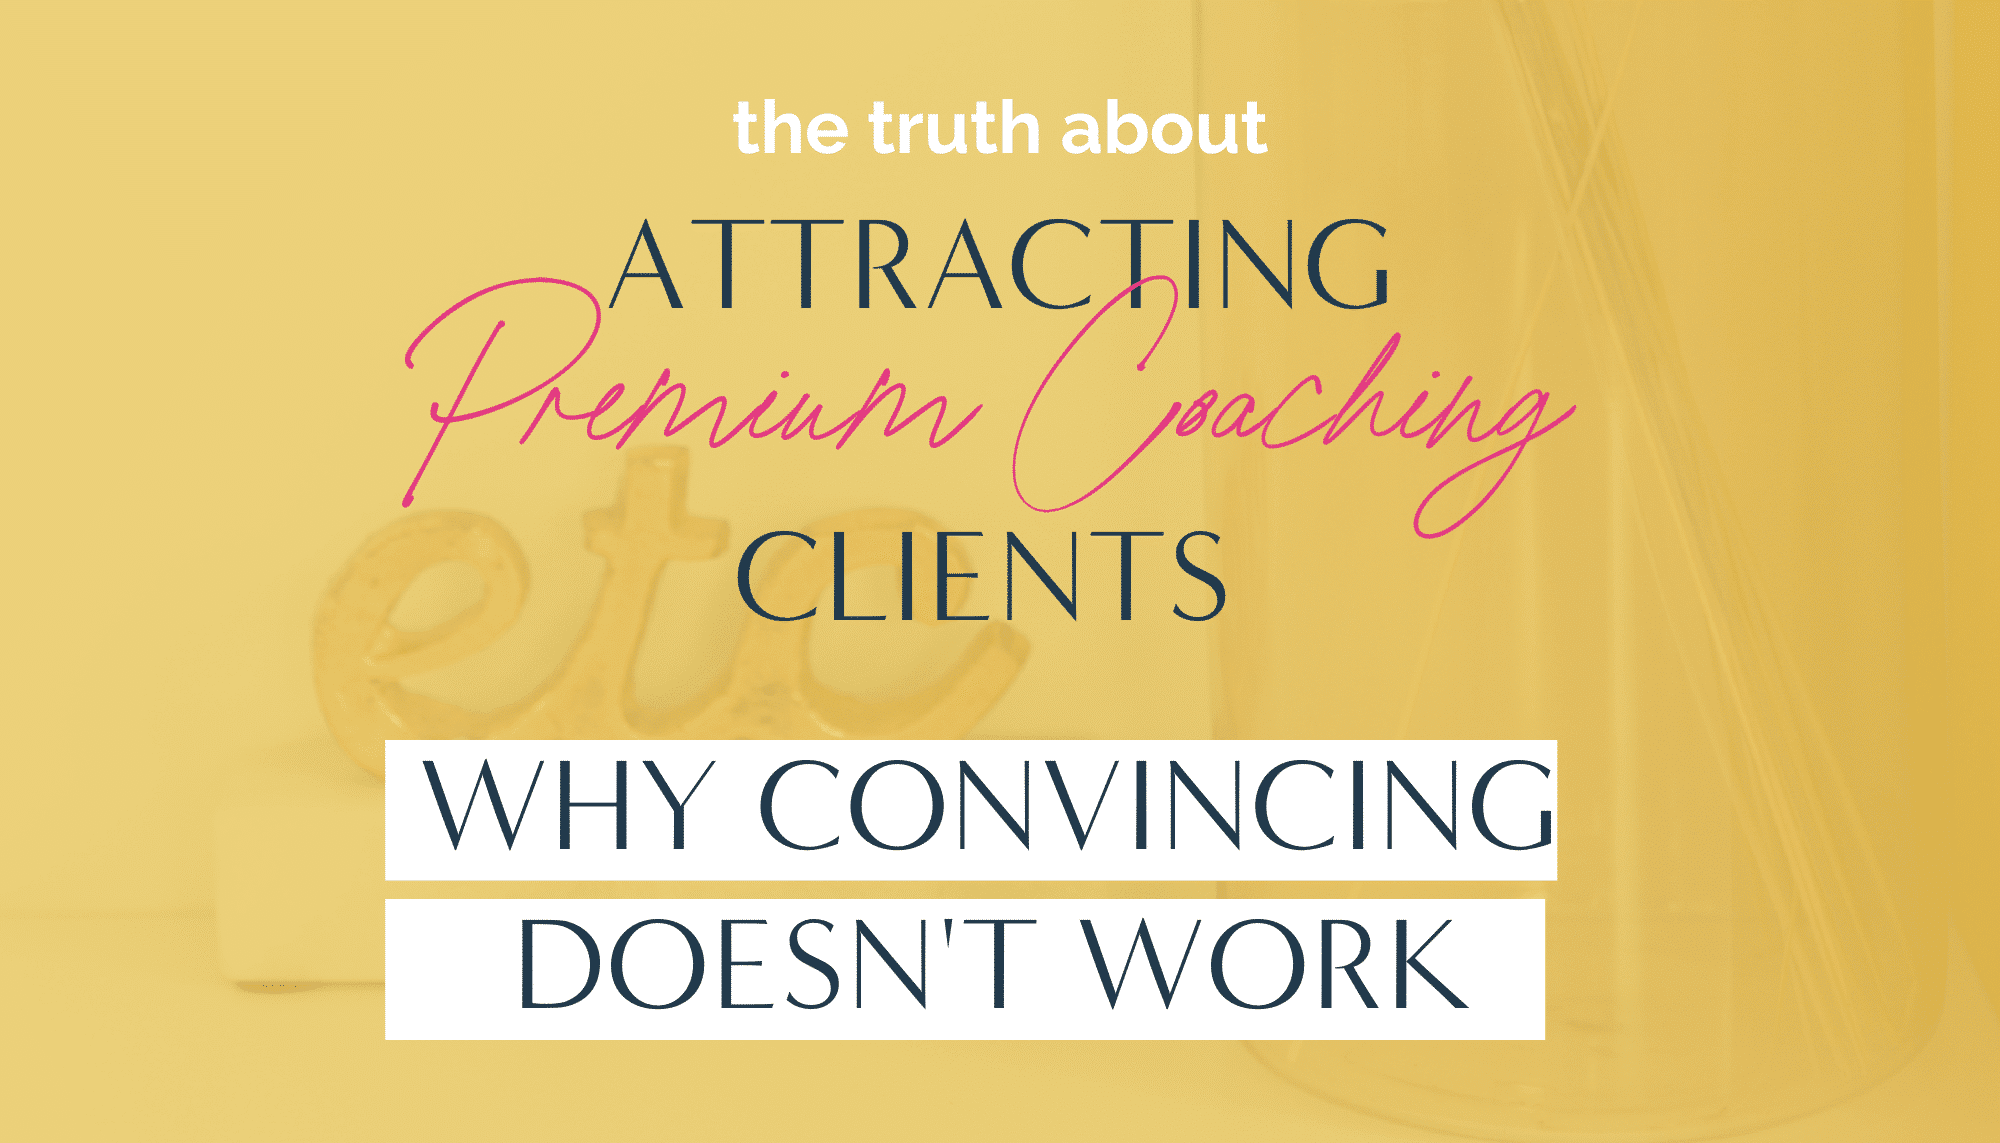 The truth about attracting premium coaching clients and why convincing doesn't work | brand strategy Fabi Paolini